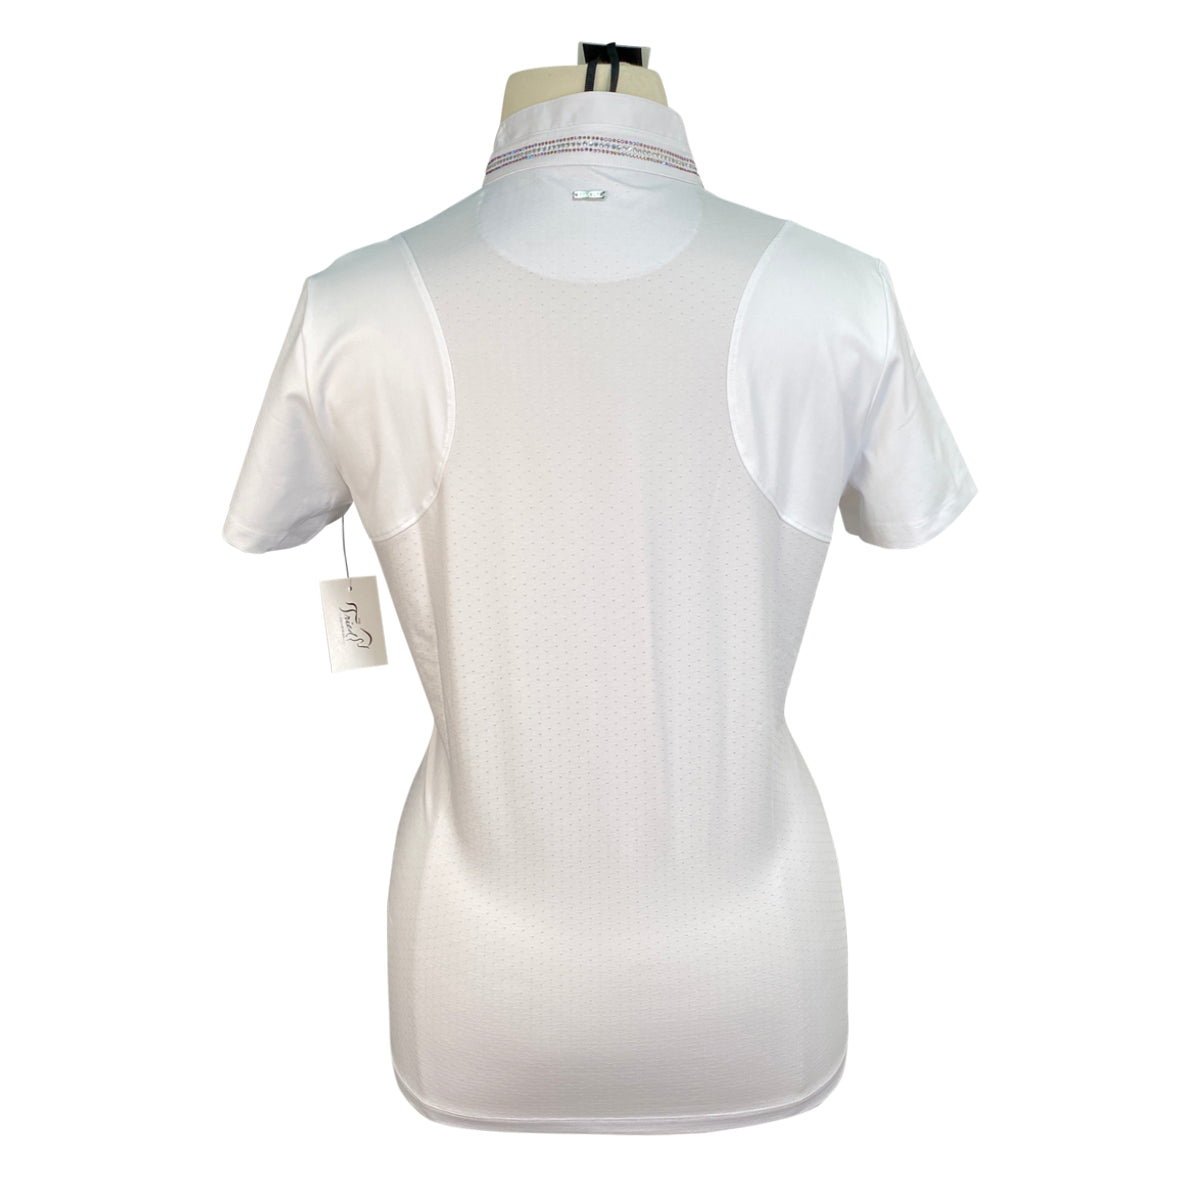 Pikeur &#39;Phiola&#39; Competition Shirt in WhitePikeur &#39;Phiola&#39; Competition Shirt in White